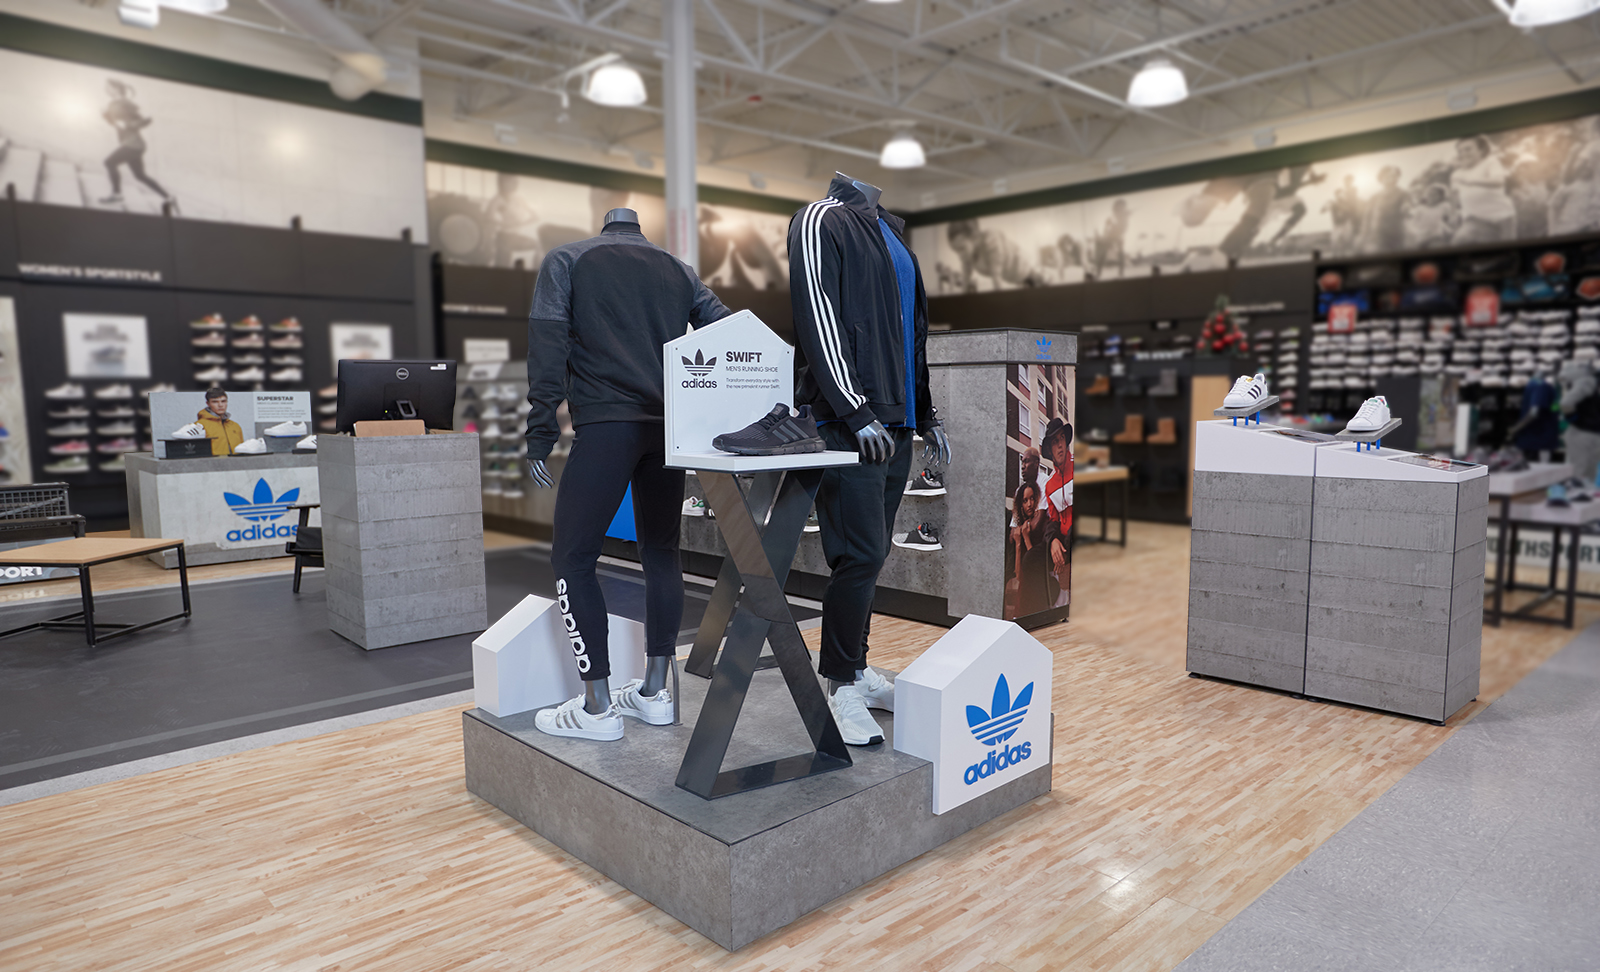 One of the many custom displays The Bernard Group designed, prototyped, and engineered for Adidas.